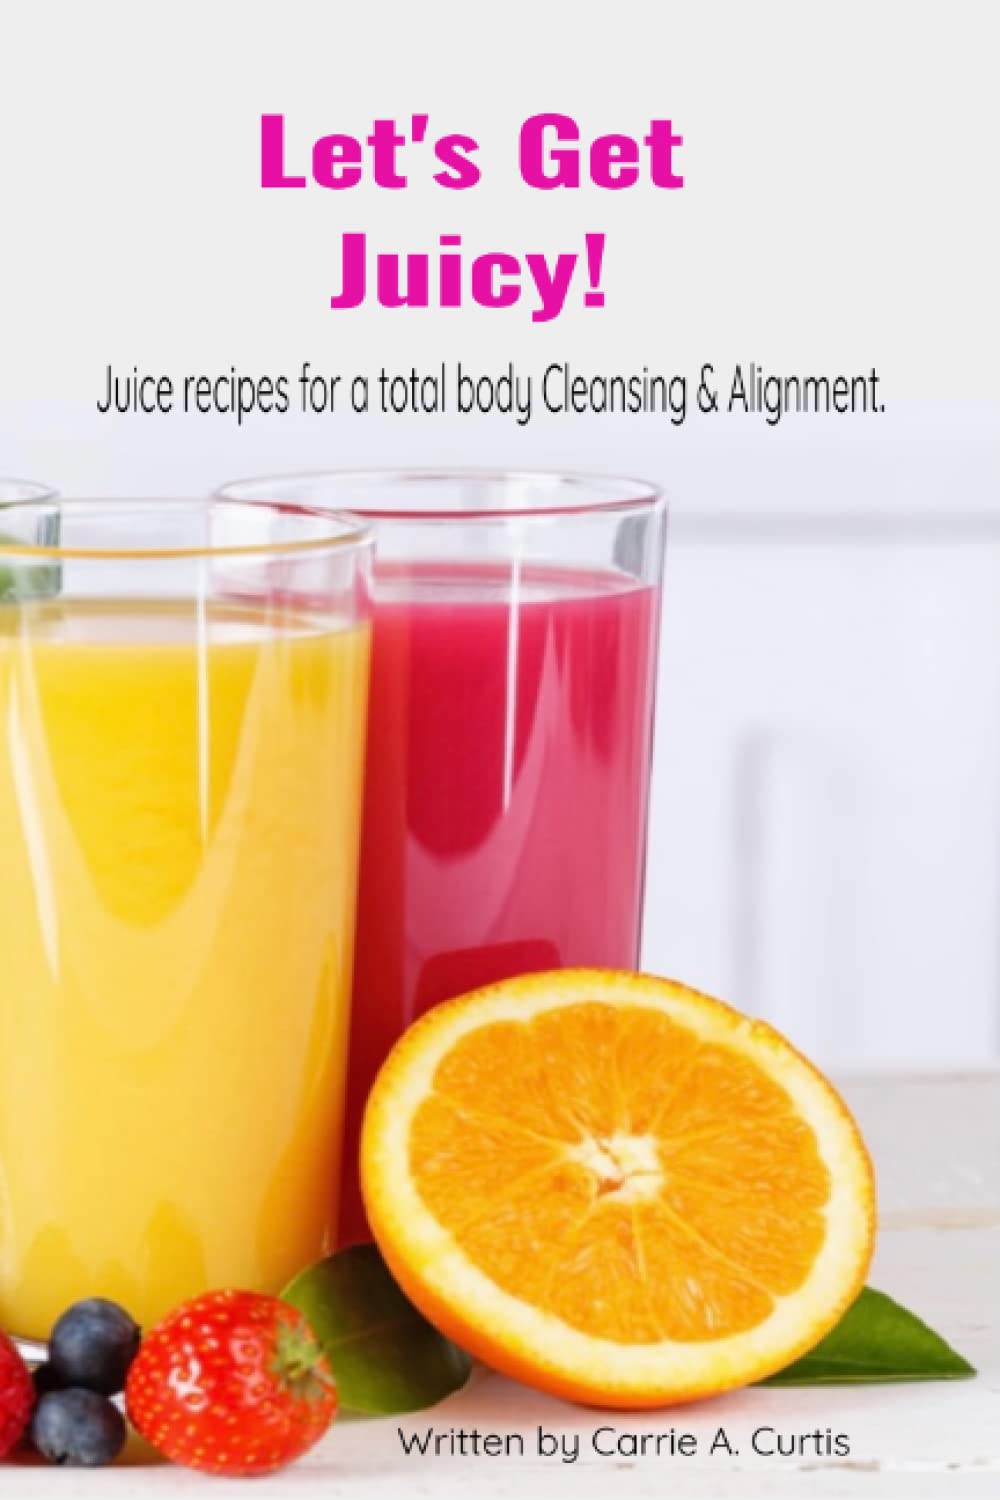 Let's Get Juicy!: Juice recipes for a total body Cleansing & Alignment.